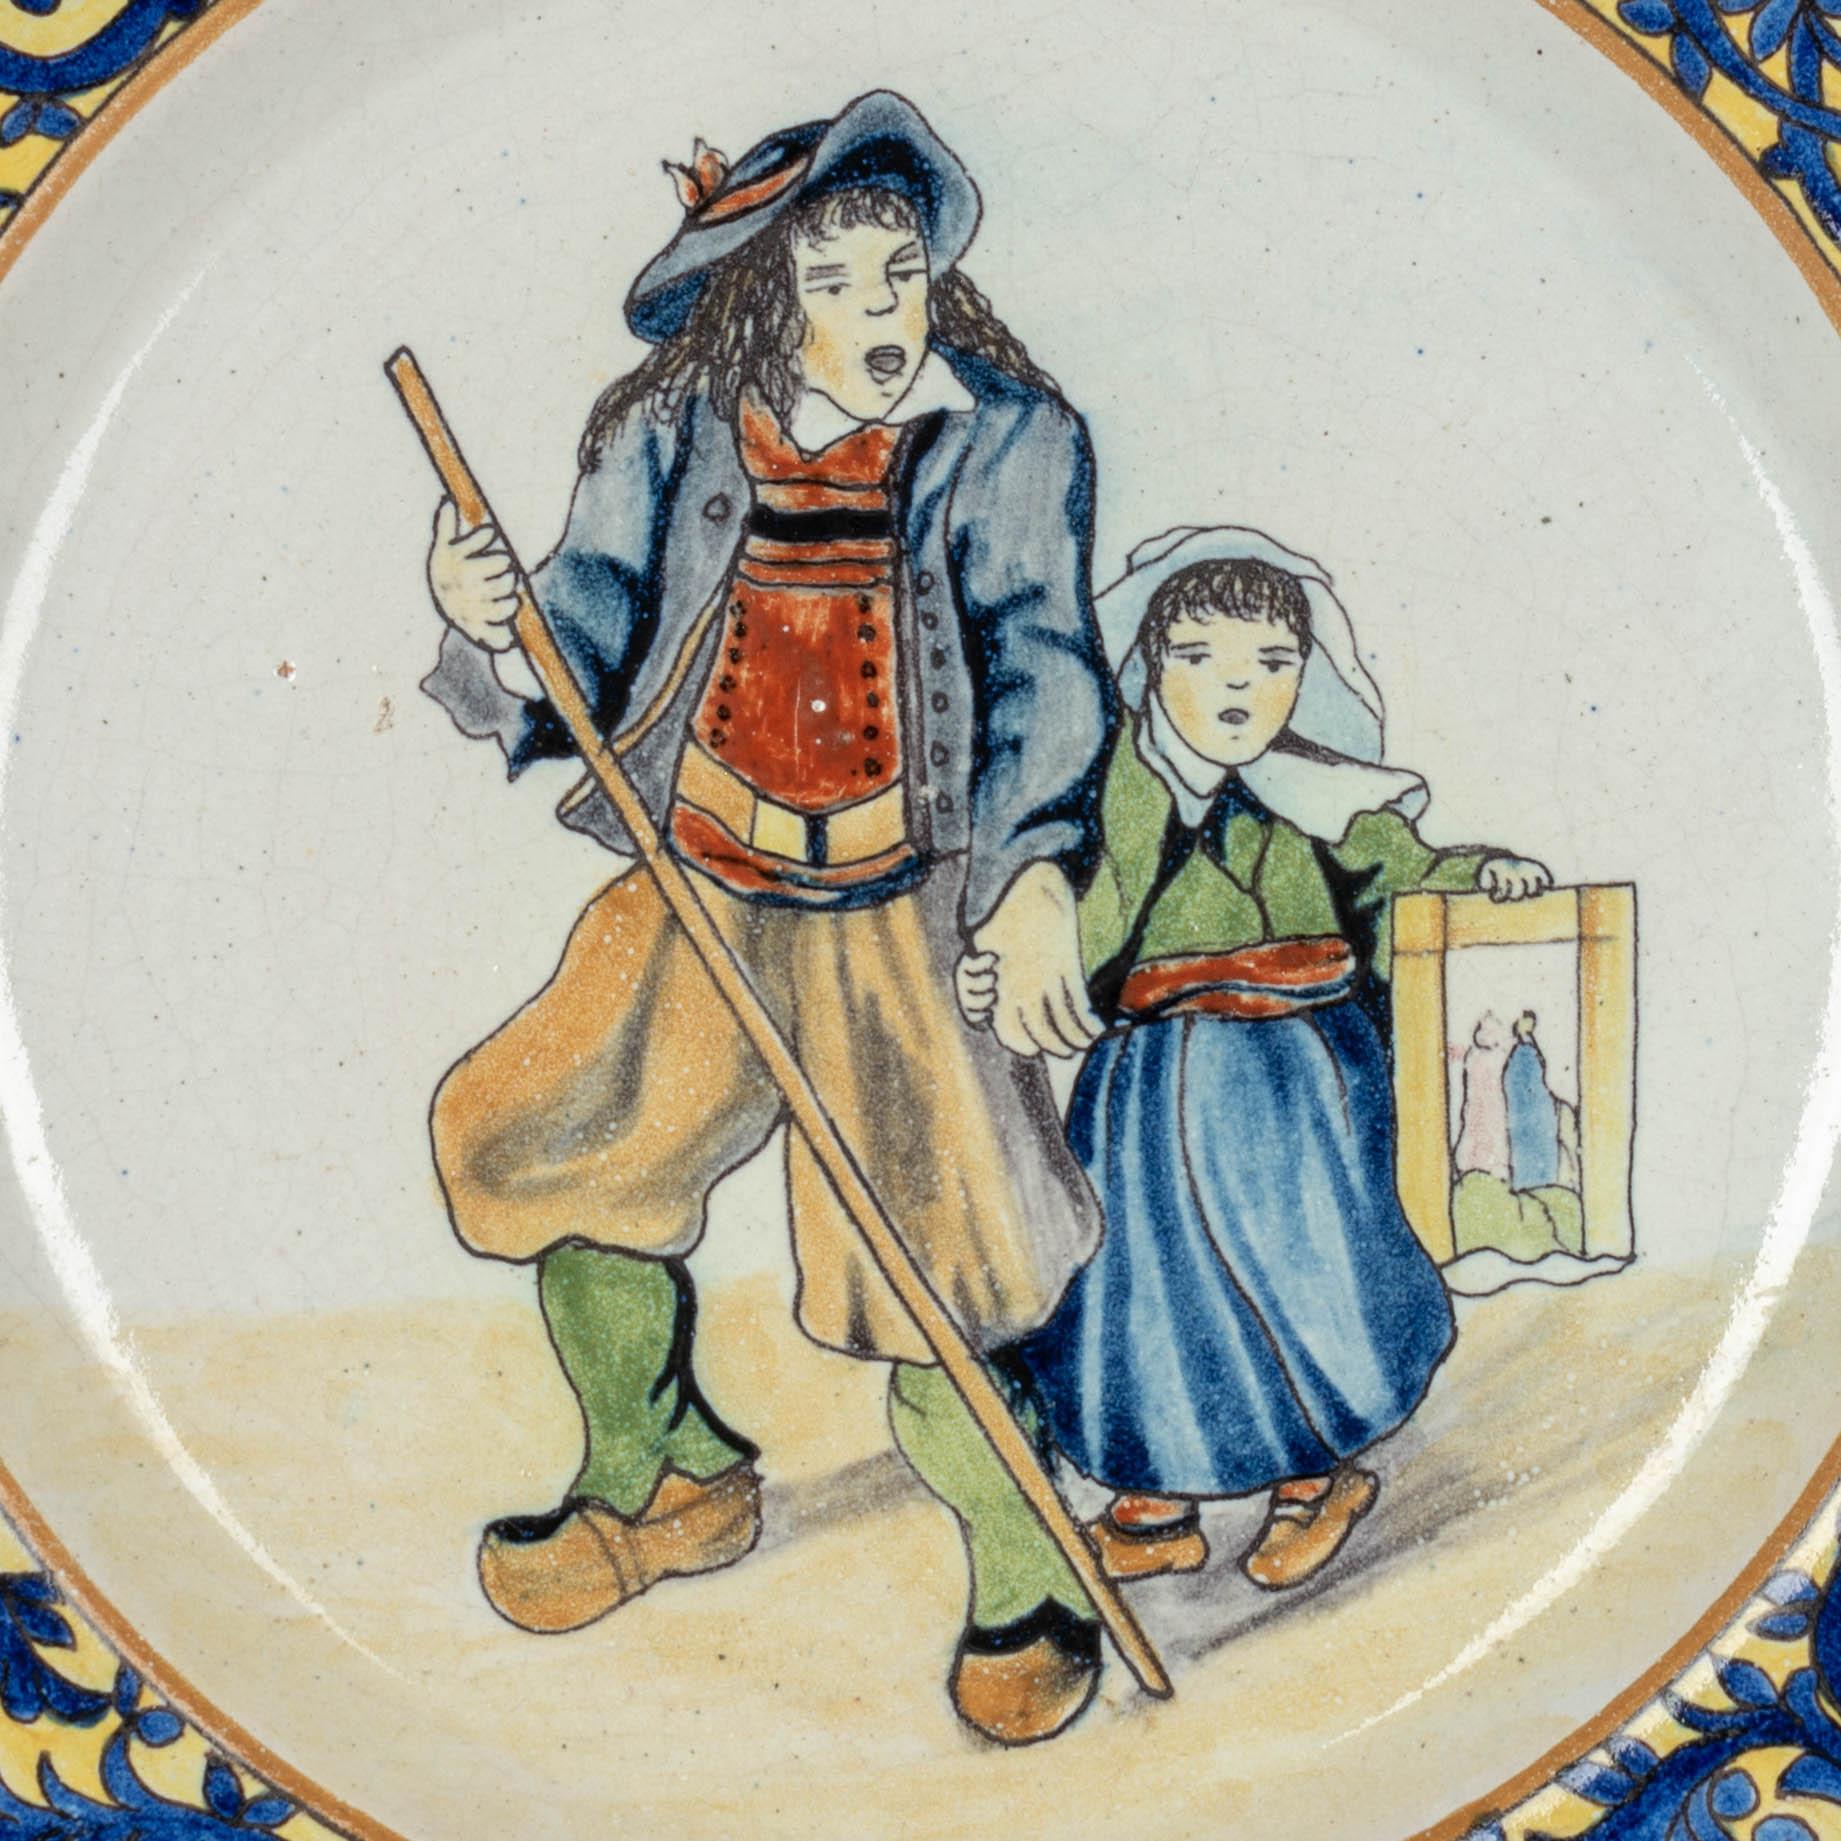 A late 19th century French Malicorne faience pate, hand painted with Breton man and child in traditional costume and decorative blue and yellow border on the rim. Nice quality, thick plate. In very good condition with only small losses to glaze on